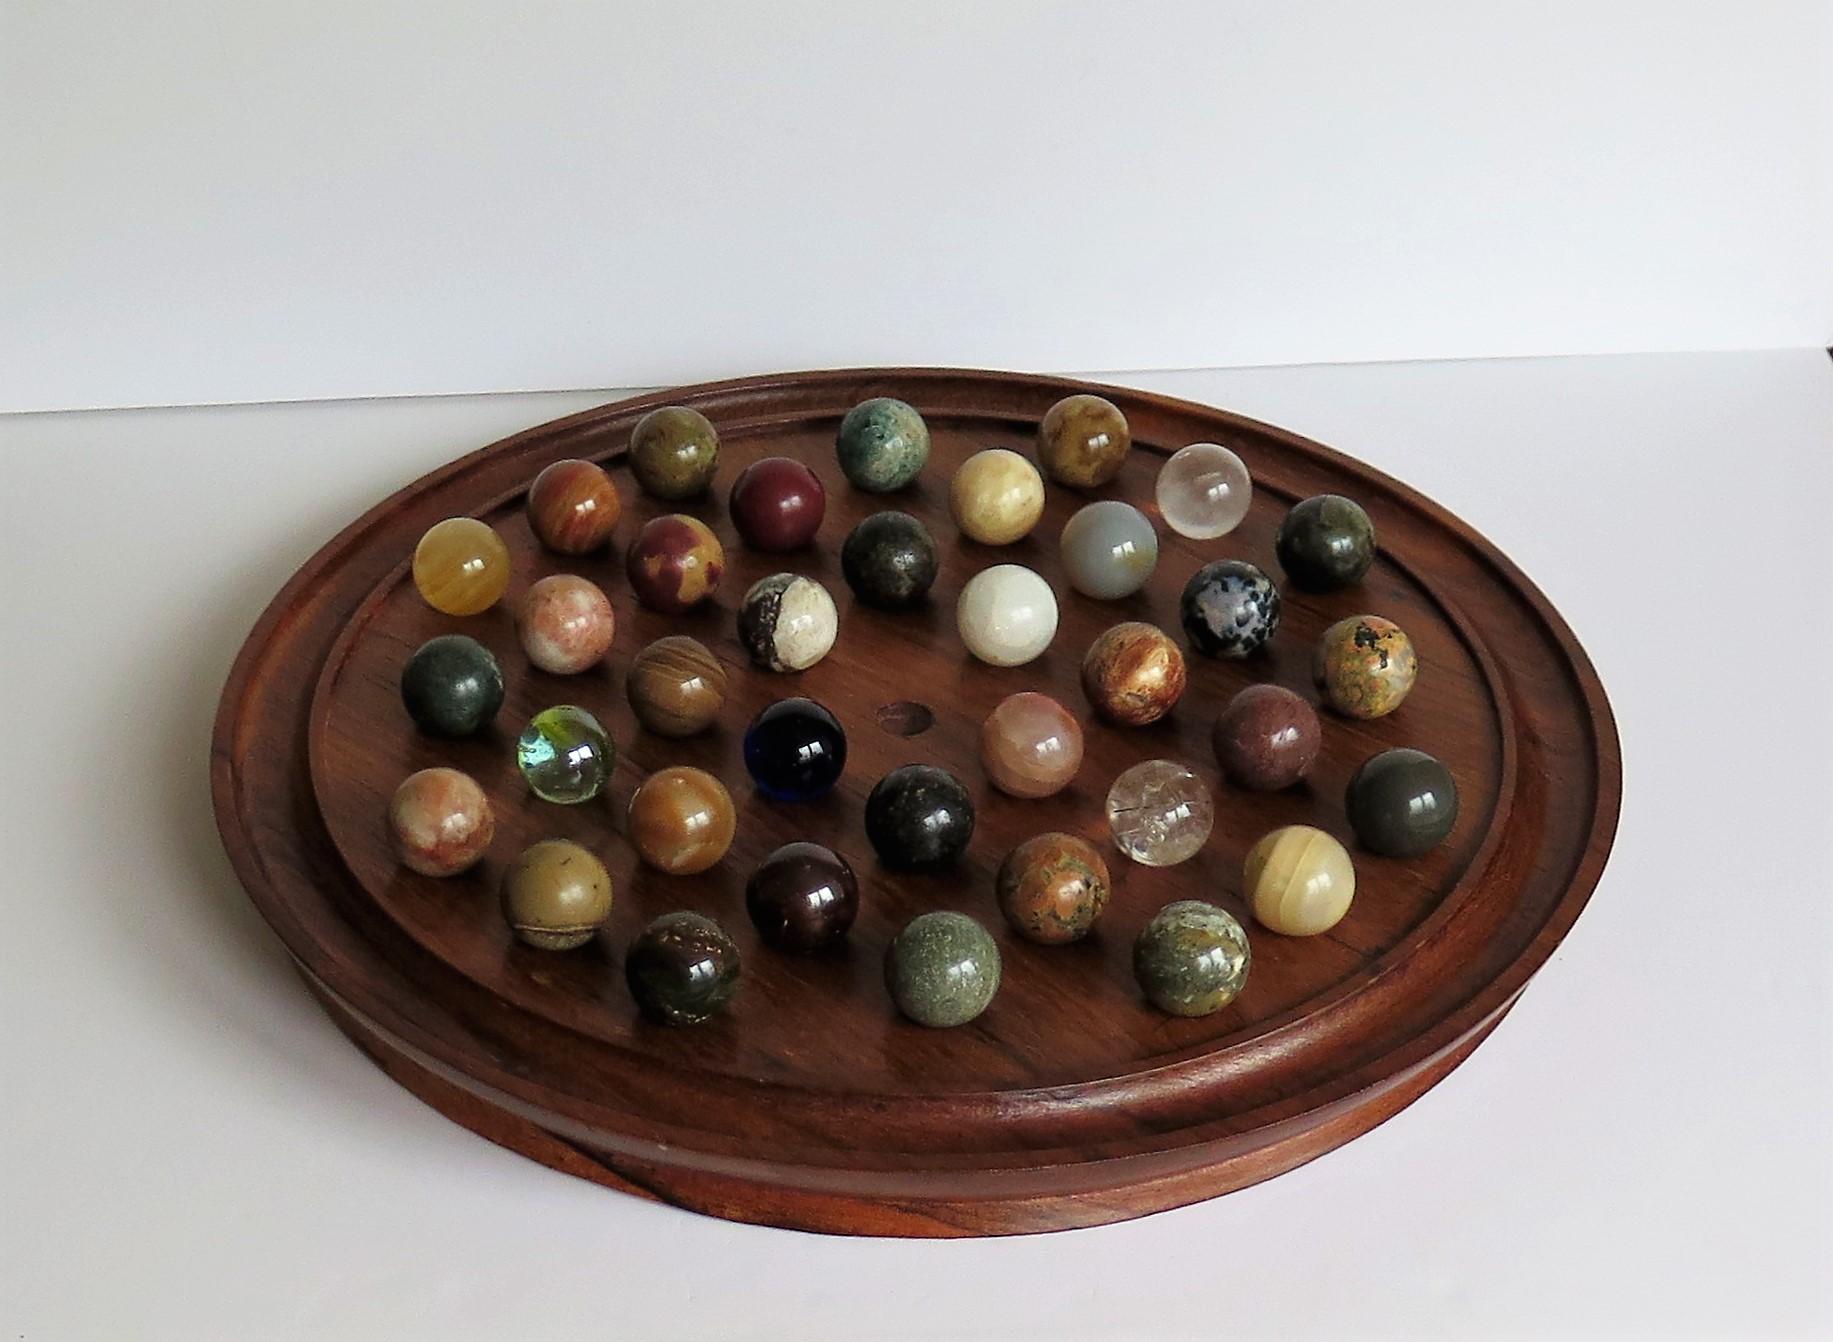 This is a very decorative and complete board game of 37 hole marble solitaire with a very large 13.5 inch diameter hardwood board and 36 beautiful individual mainly agate stone and some glass marbles, which we date to the late 19th-early 20th